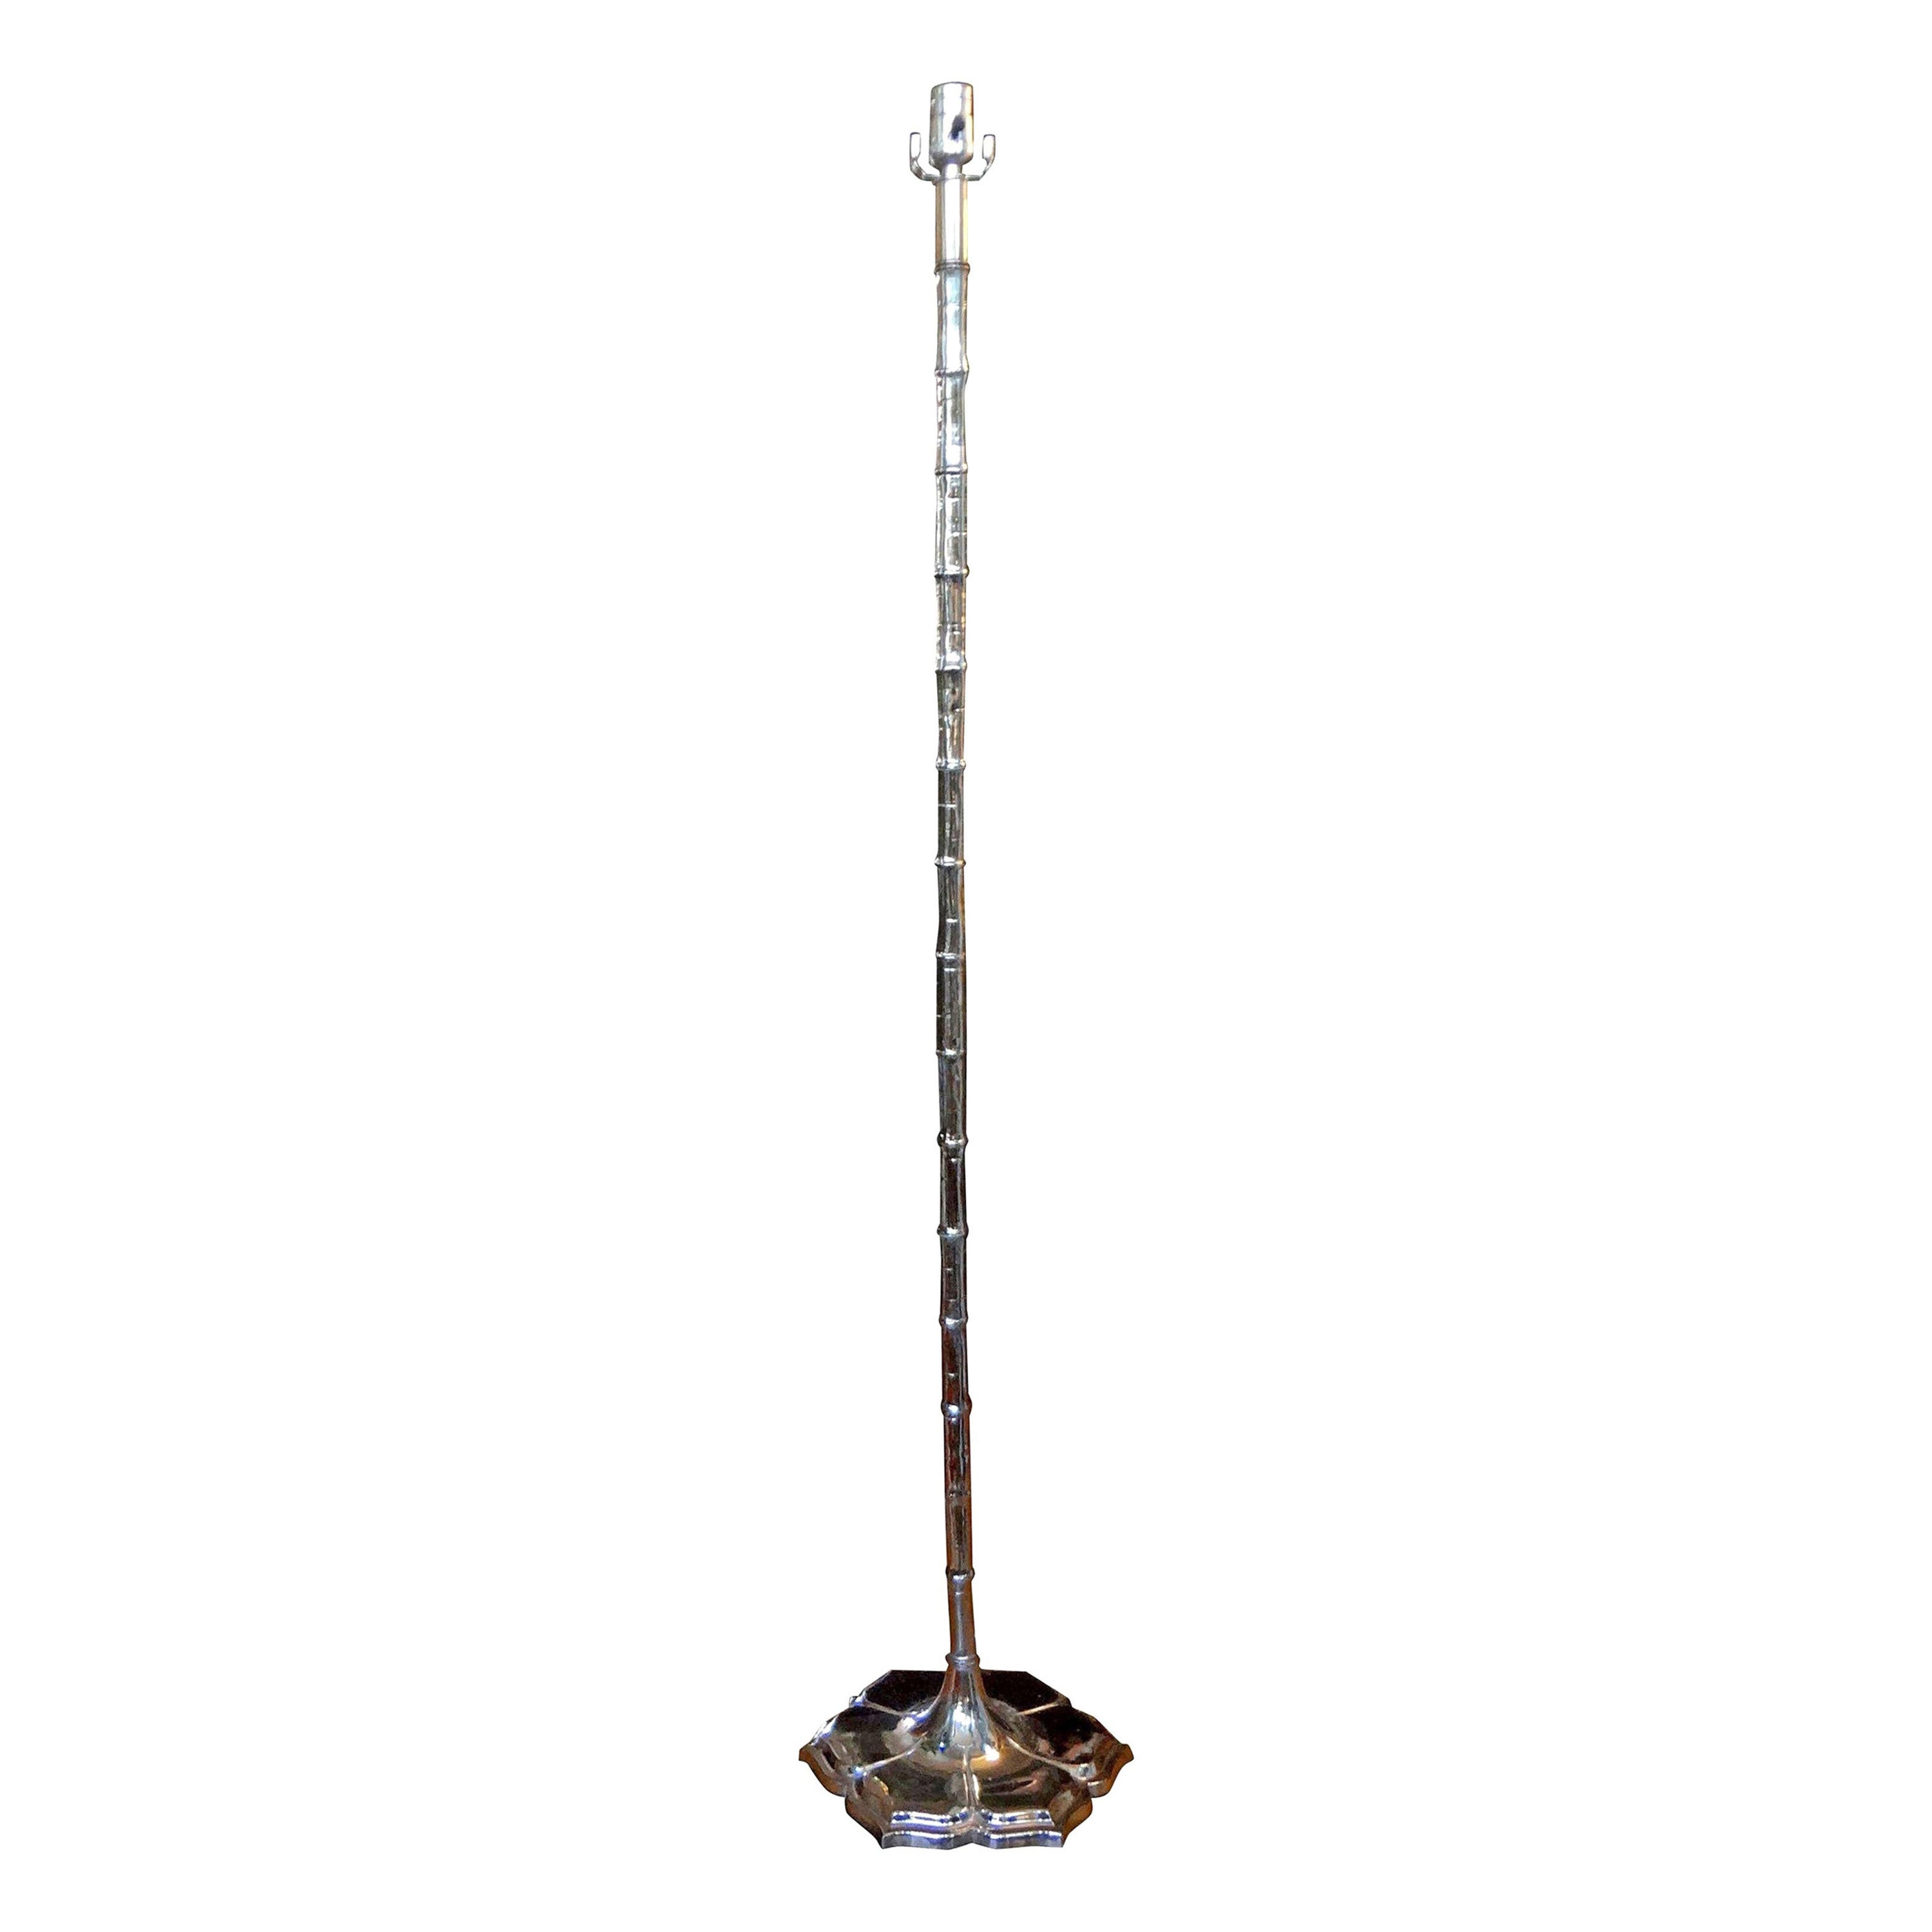 Midcentury Chrome Faux Bamboo Lotus Floor Lamp For Sale